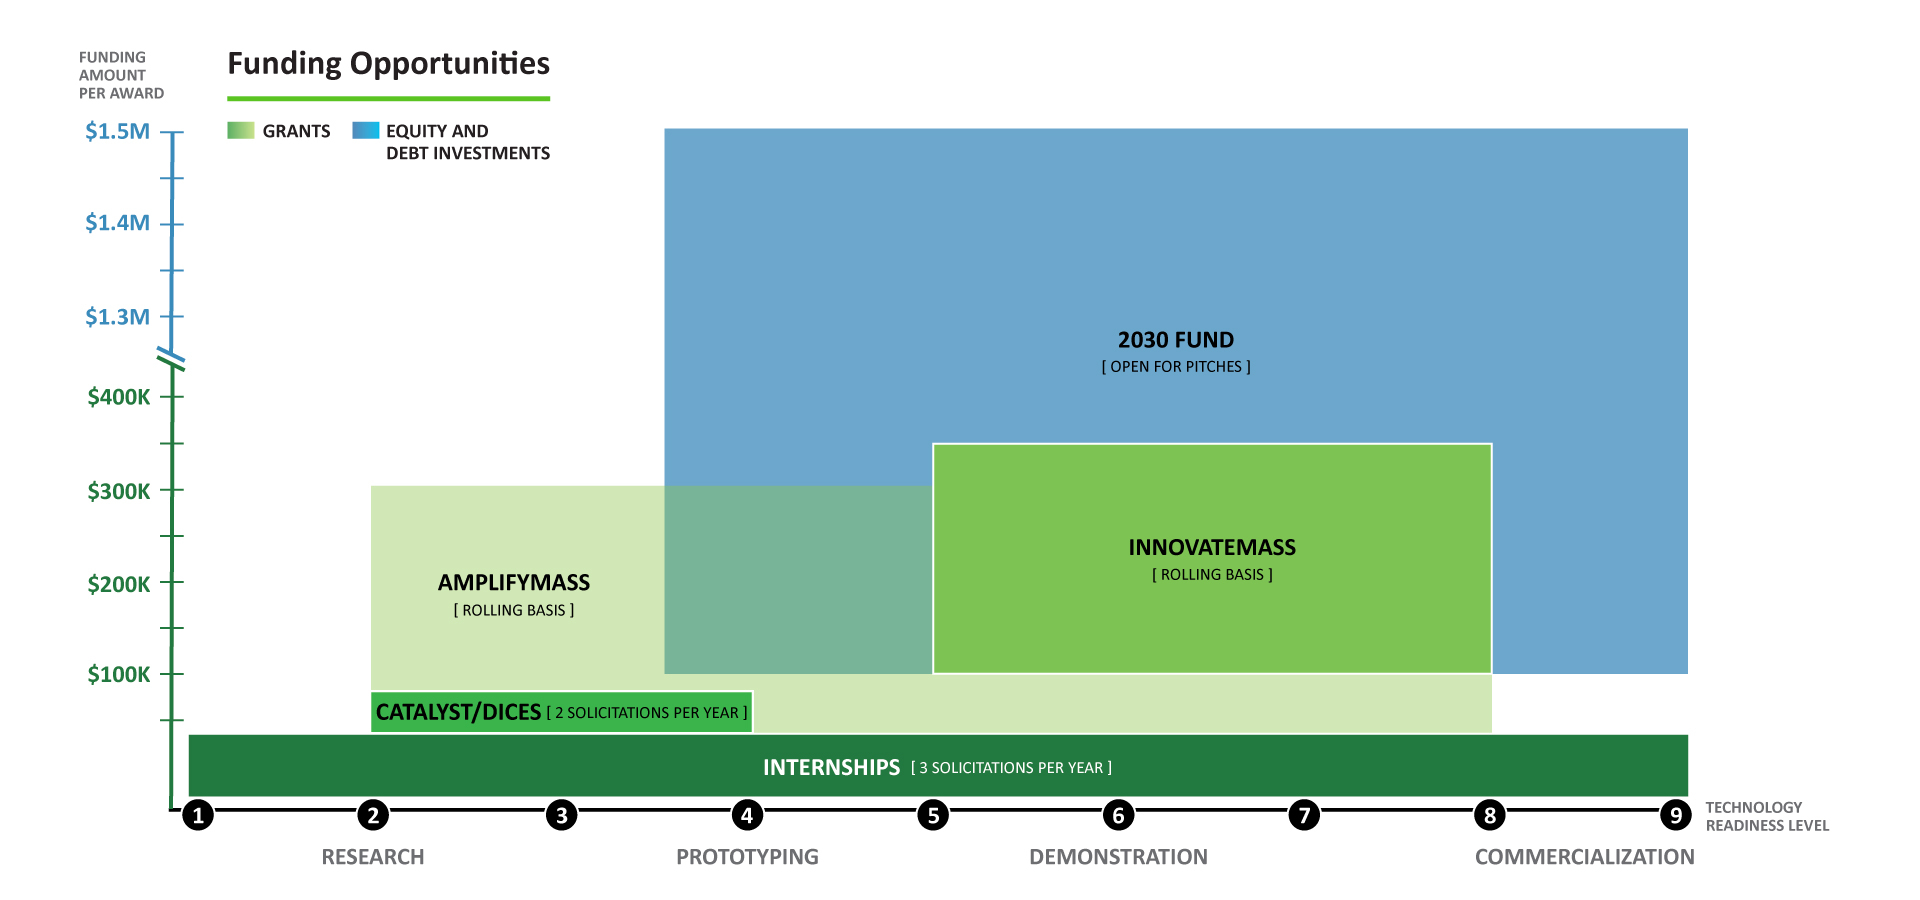 Funding Opportunities graphic